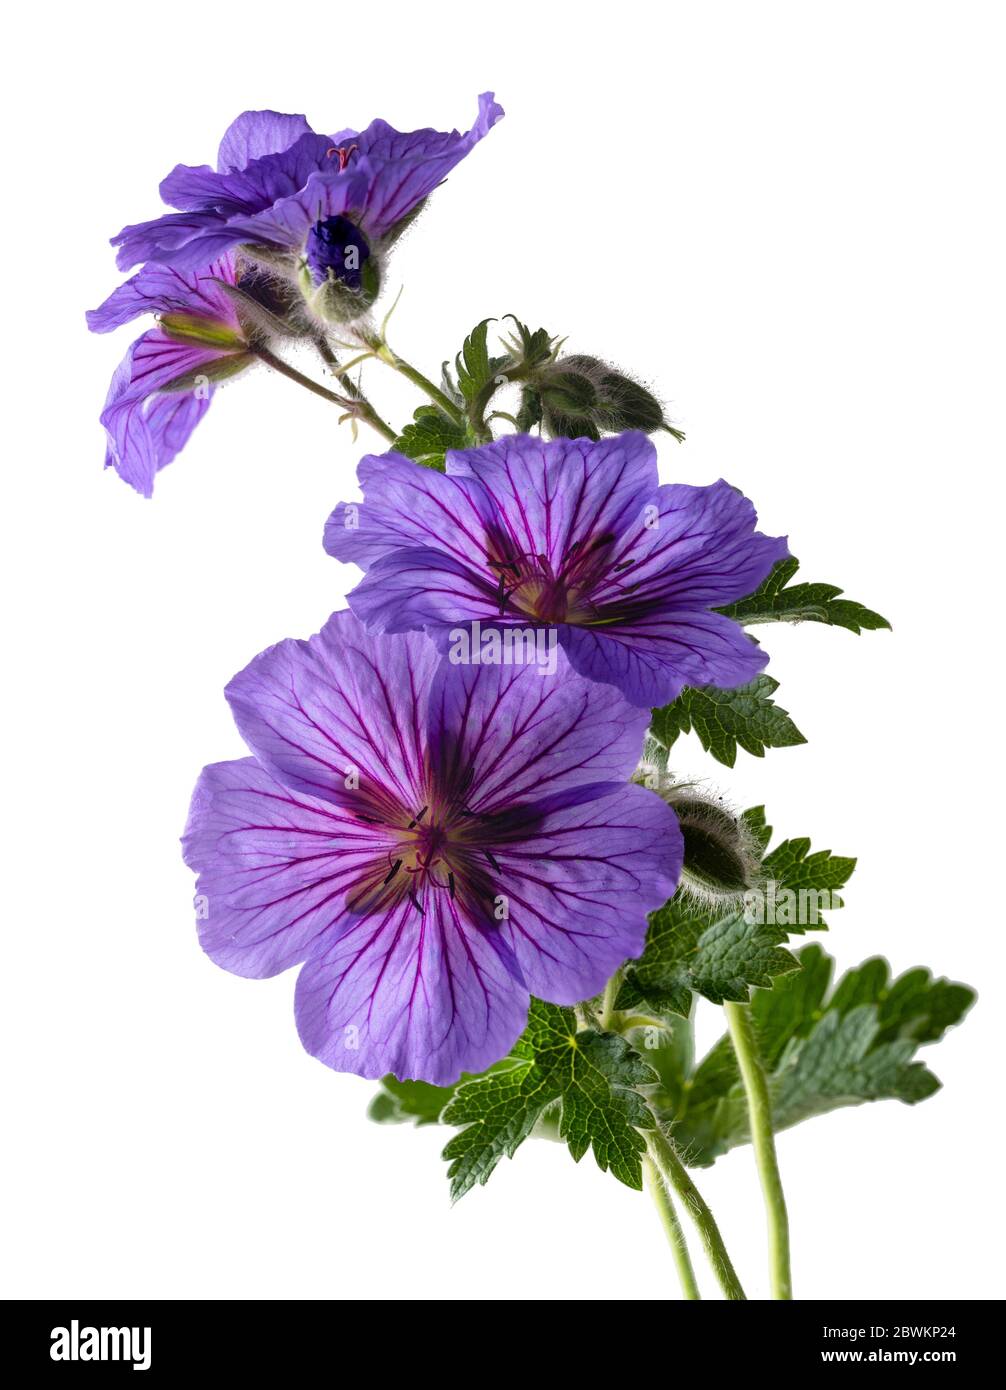 Late spring flowers of the hardy perennial Geranium x magnificum on a white background Stock Photo